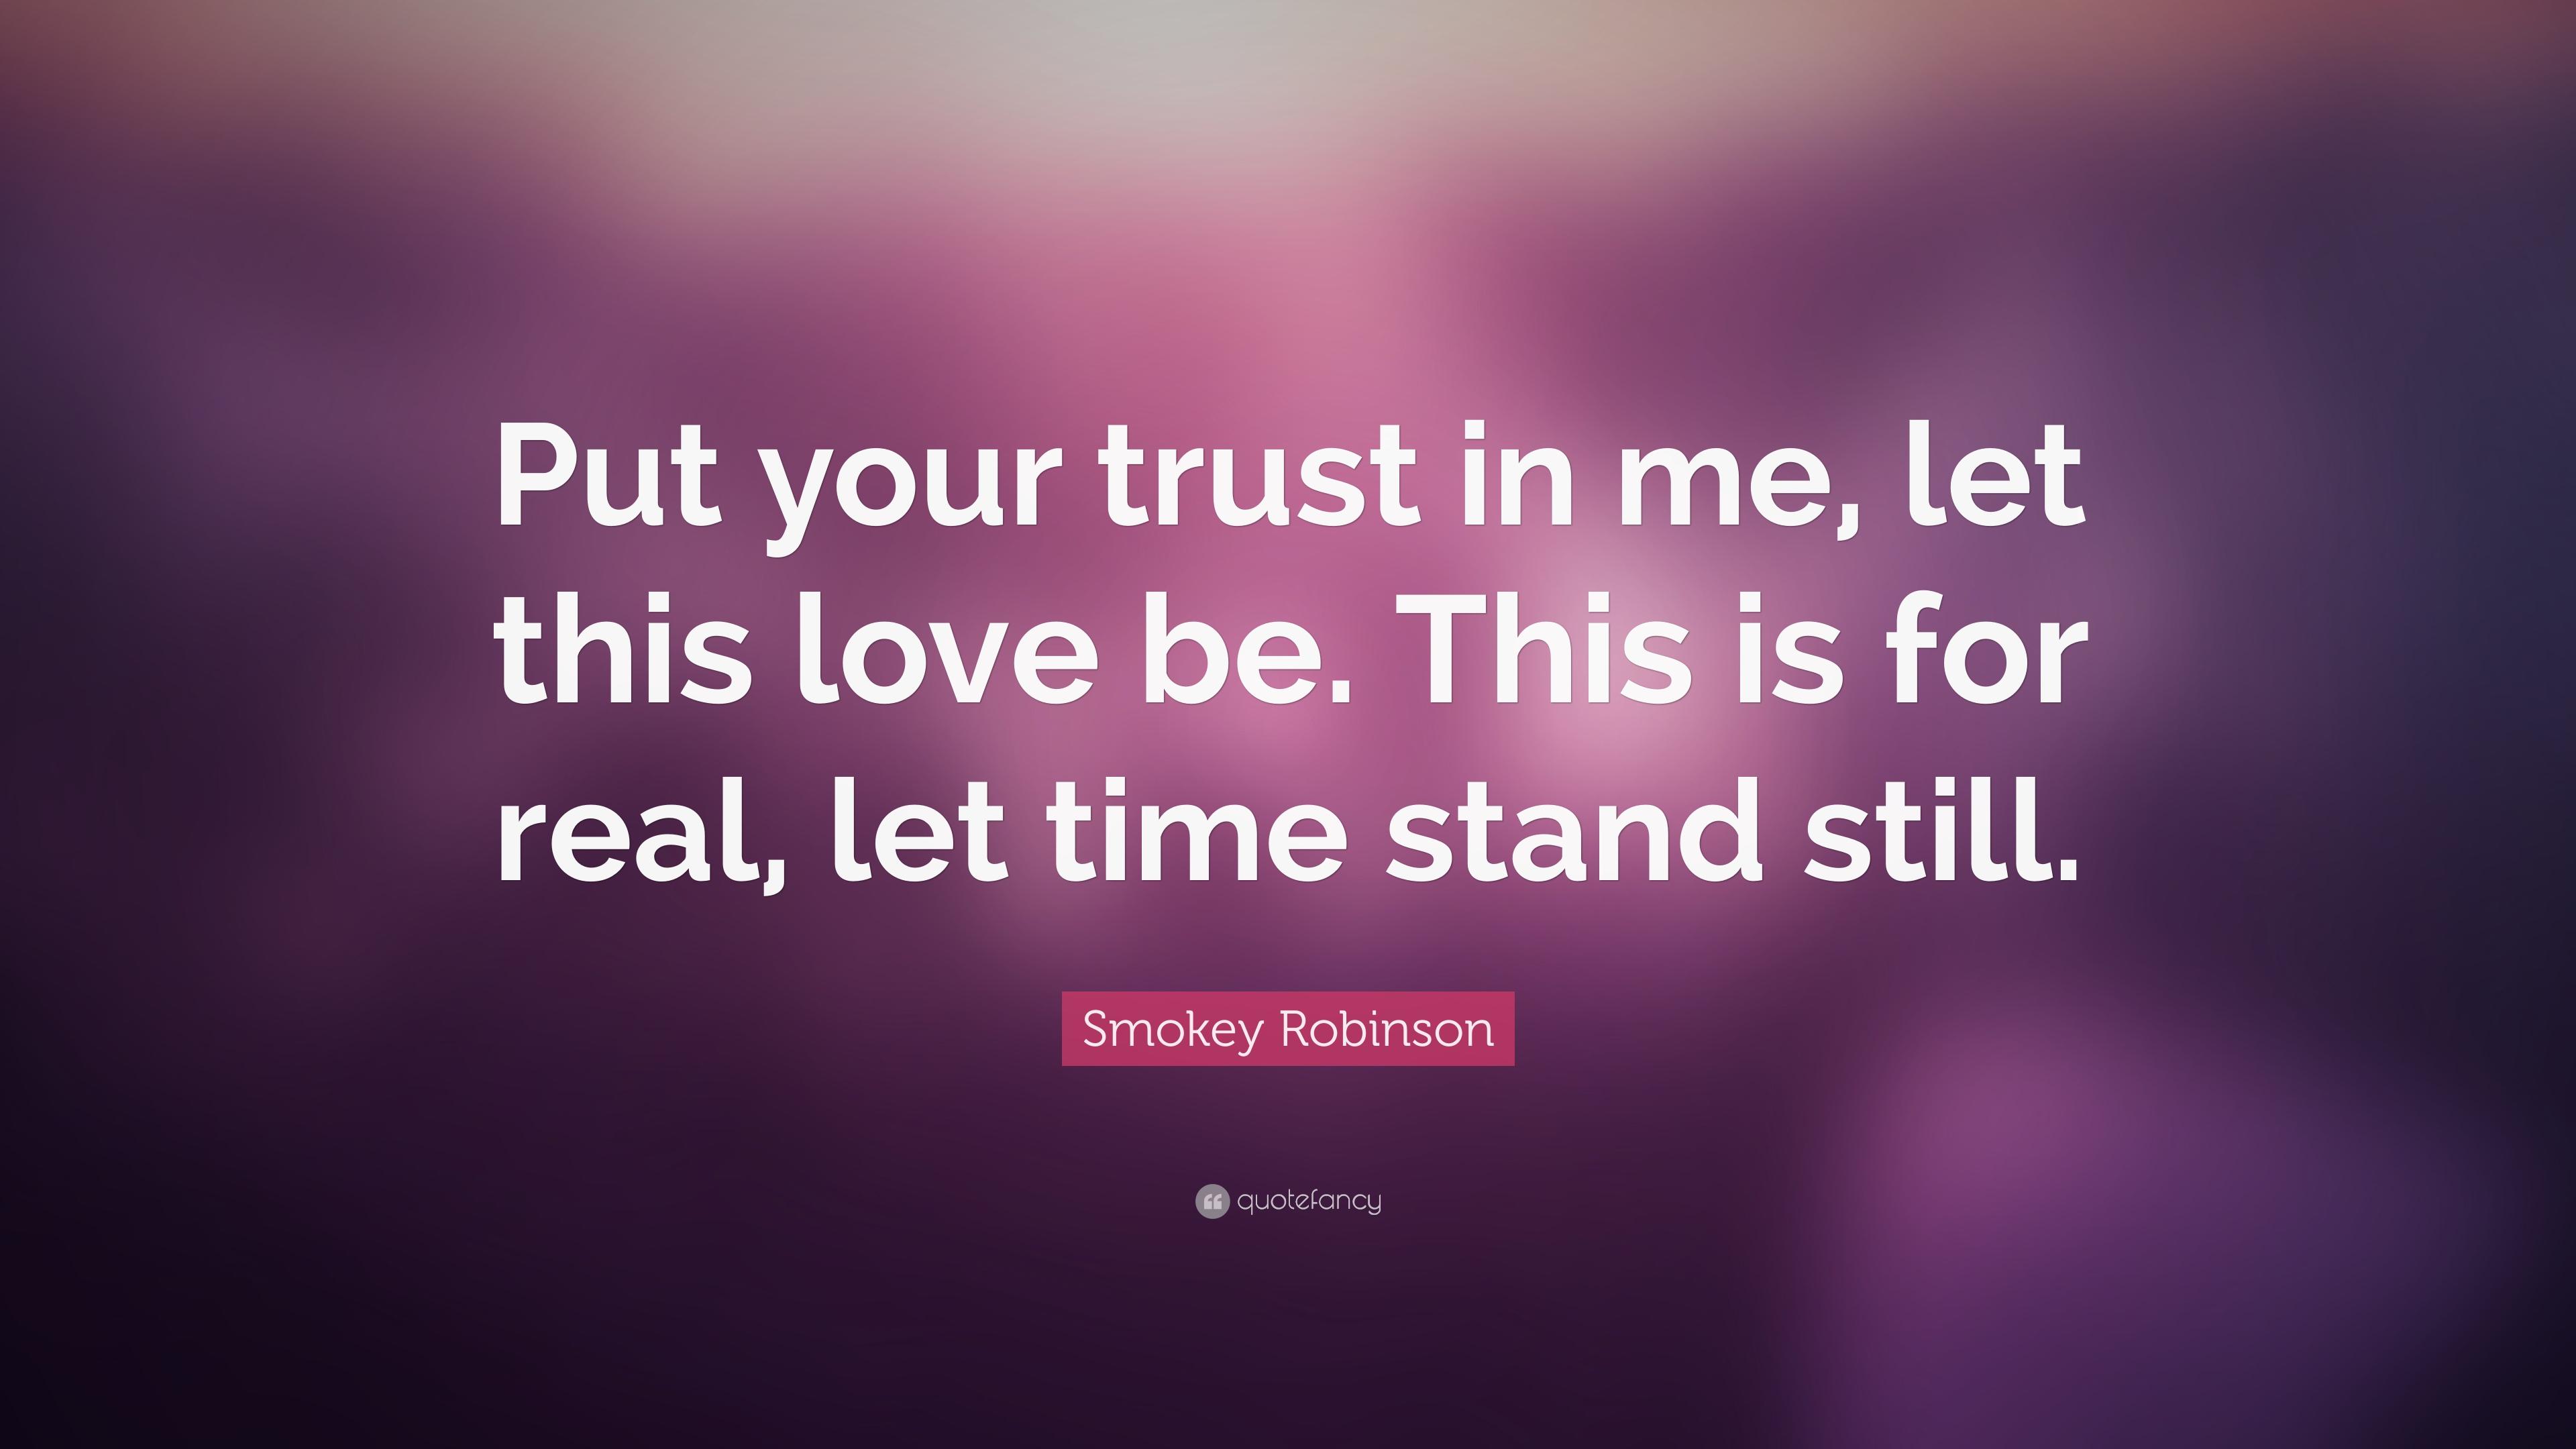 Smokey Robinson Quote: “Put your trust in me, let this love be. This